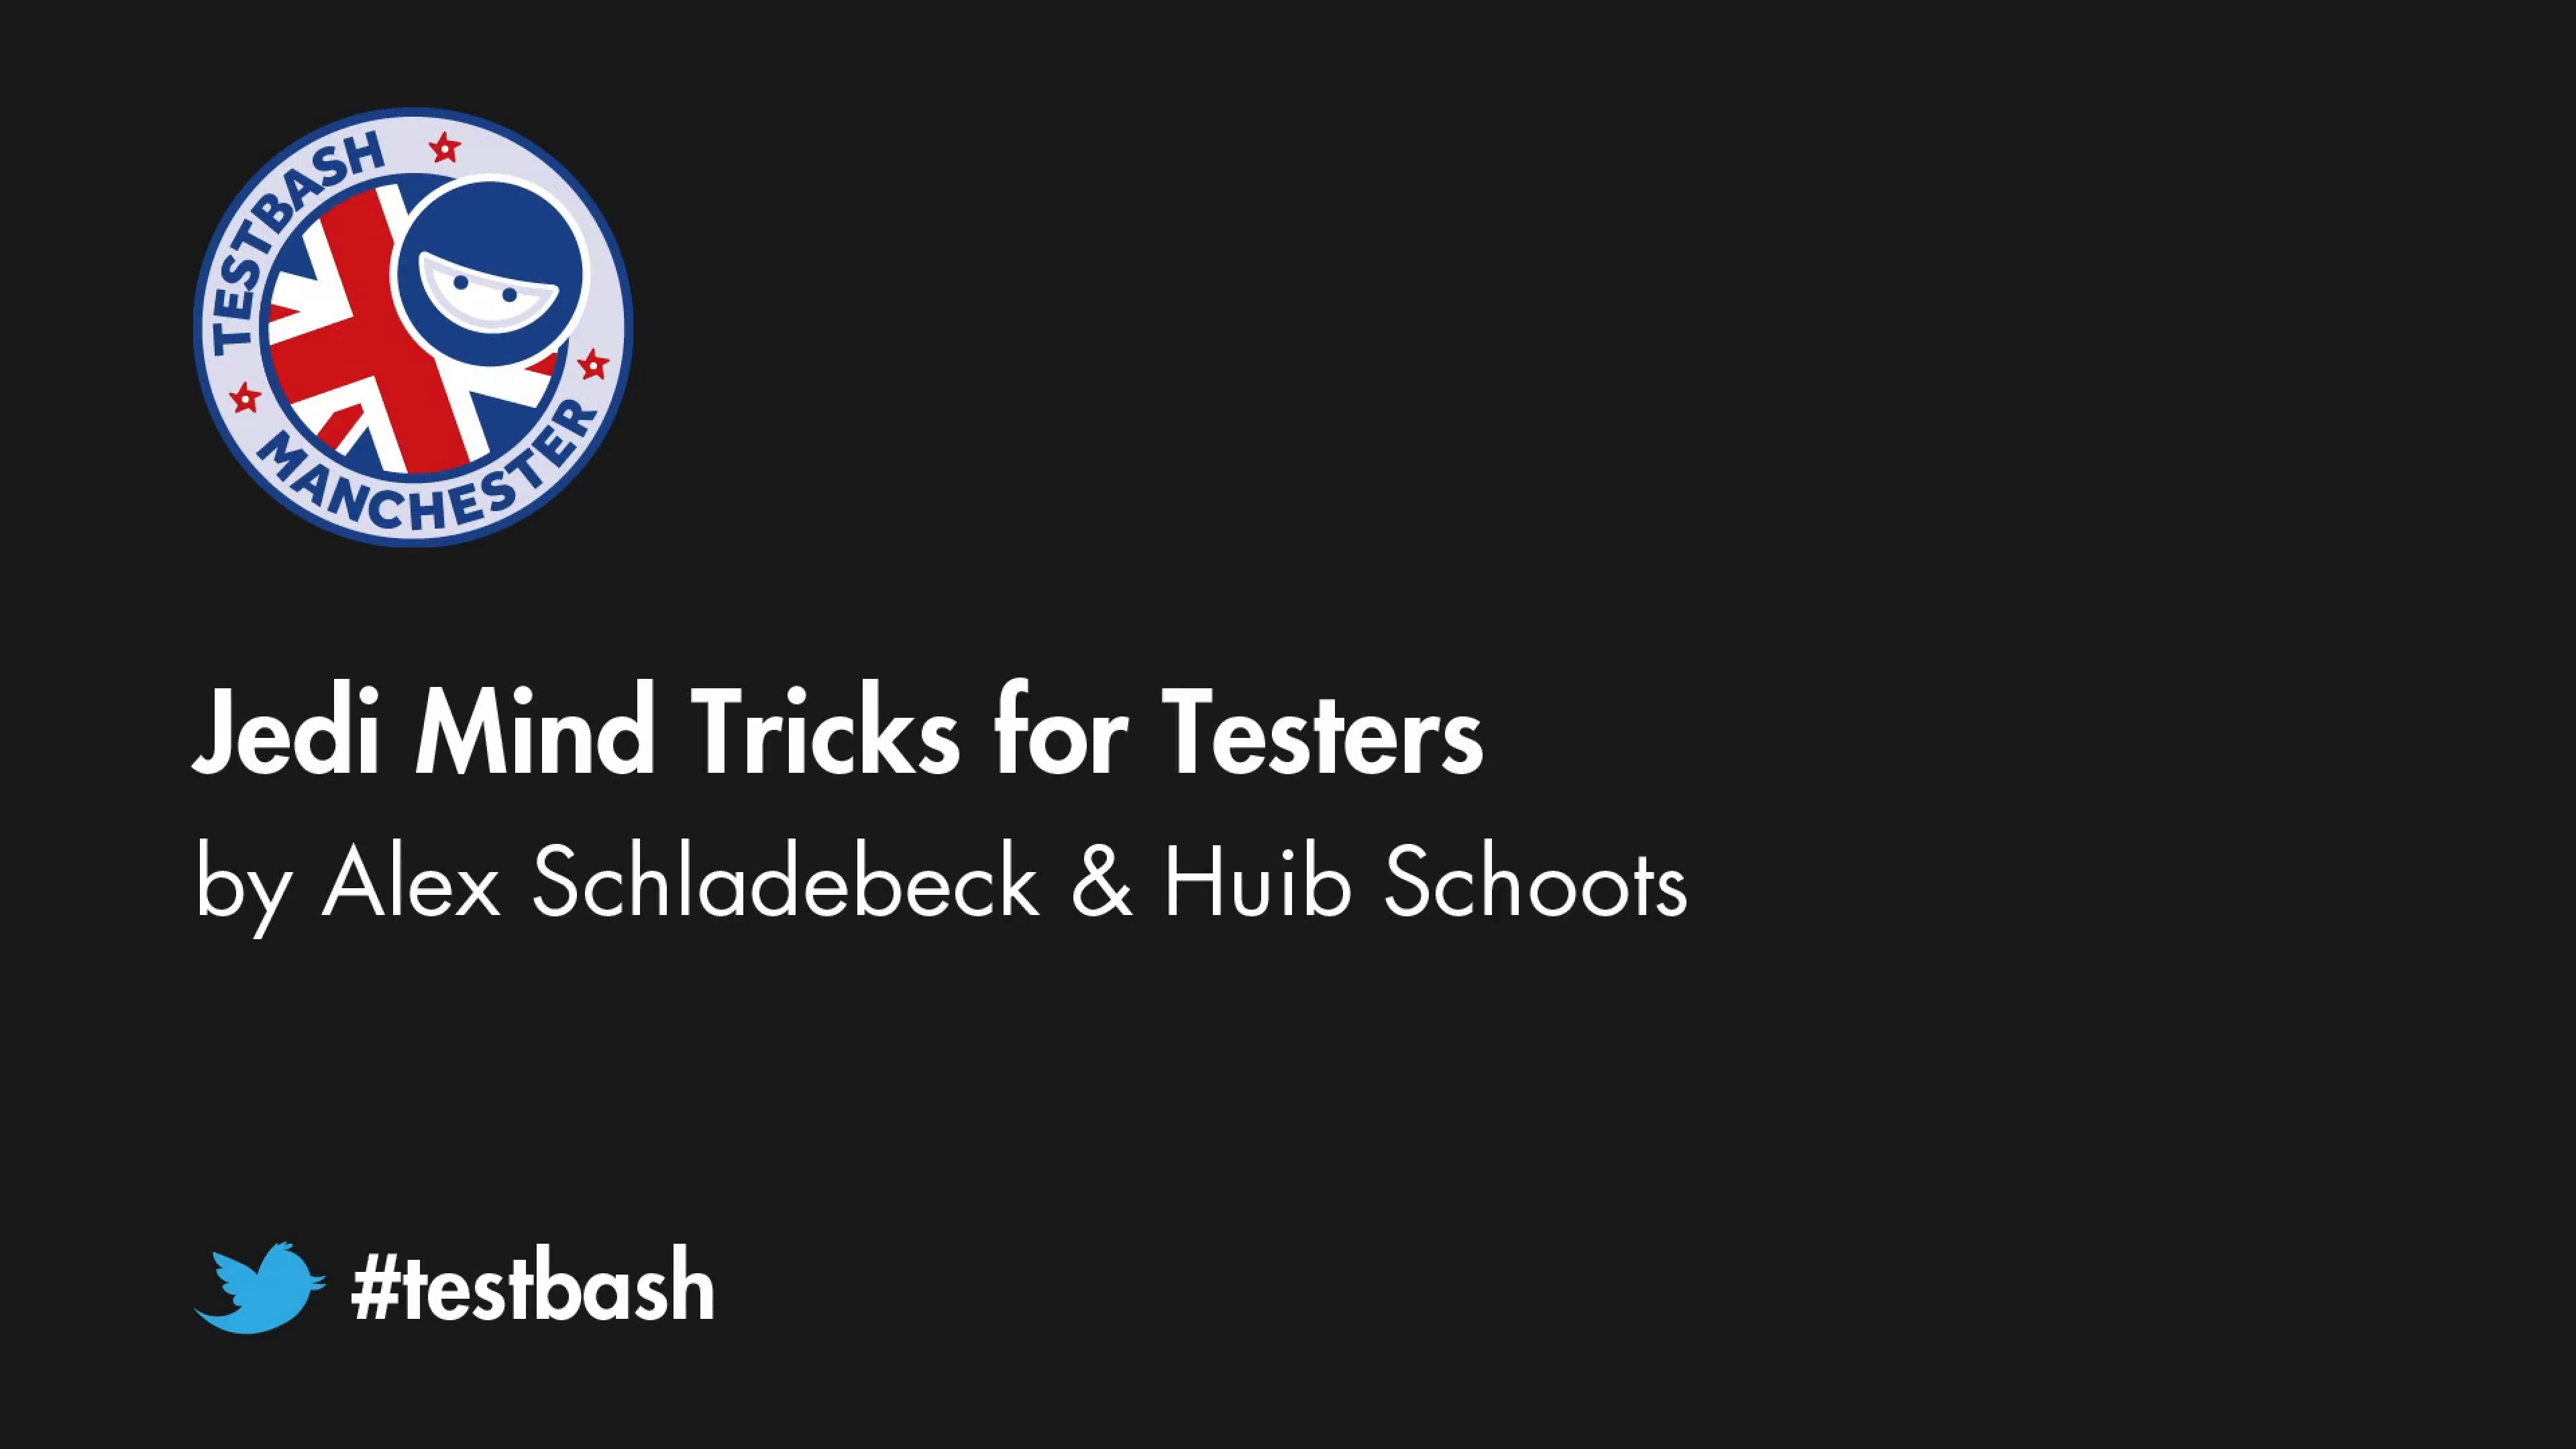 Jedi Mind Tricks for Testers - Alex Schladebeck and Huib Schoots